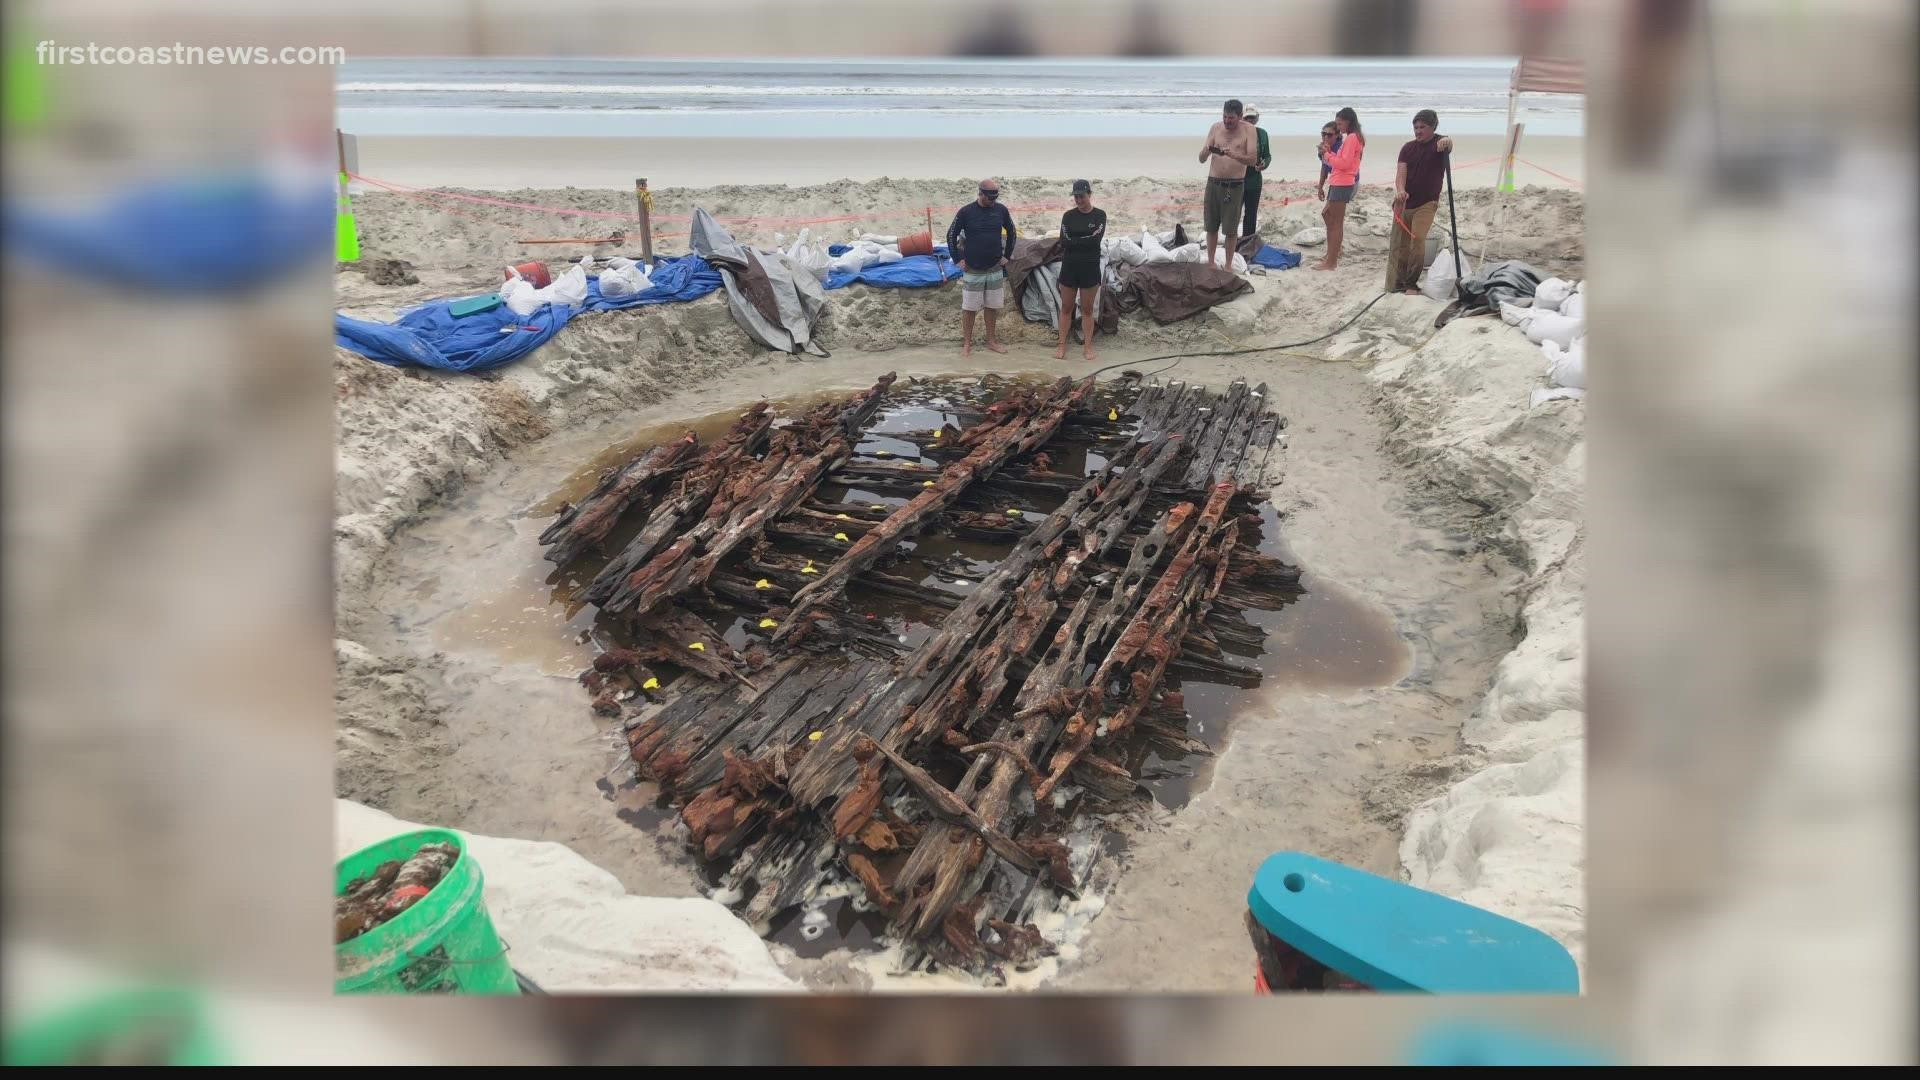 This week, an archaeology team completed unearthing the hull of the wreck.